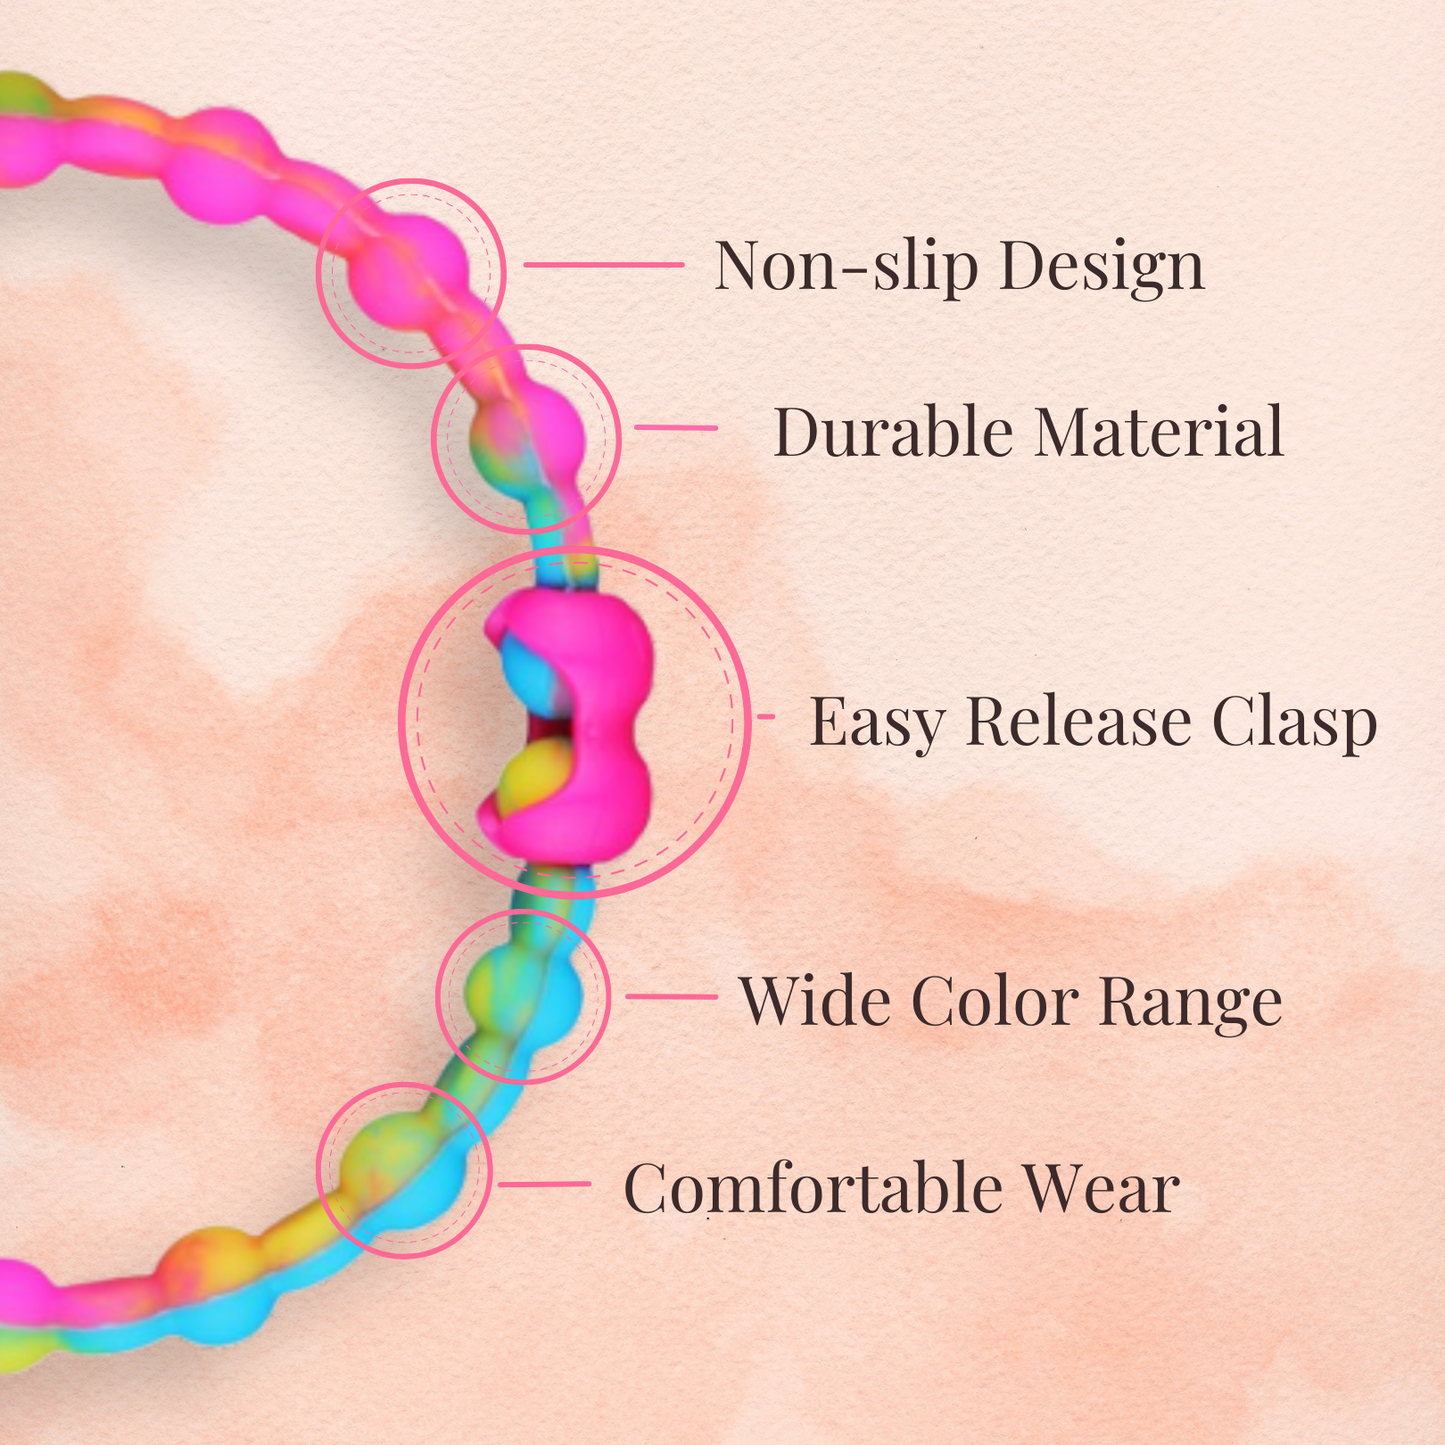 Clear Neon Blue Hair Ties (8 Pack) - A Bold Pop of Color for Every Adventure